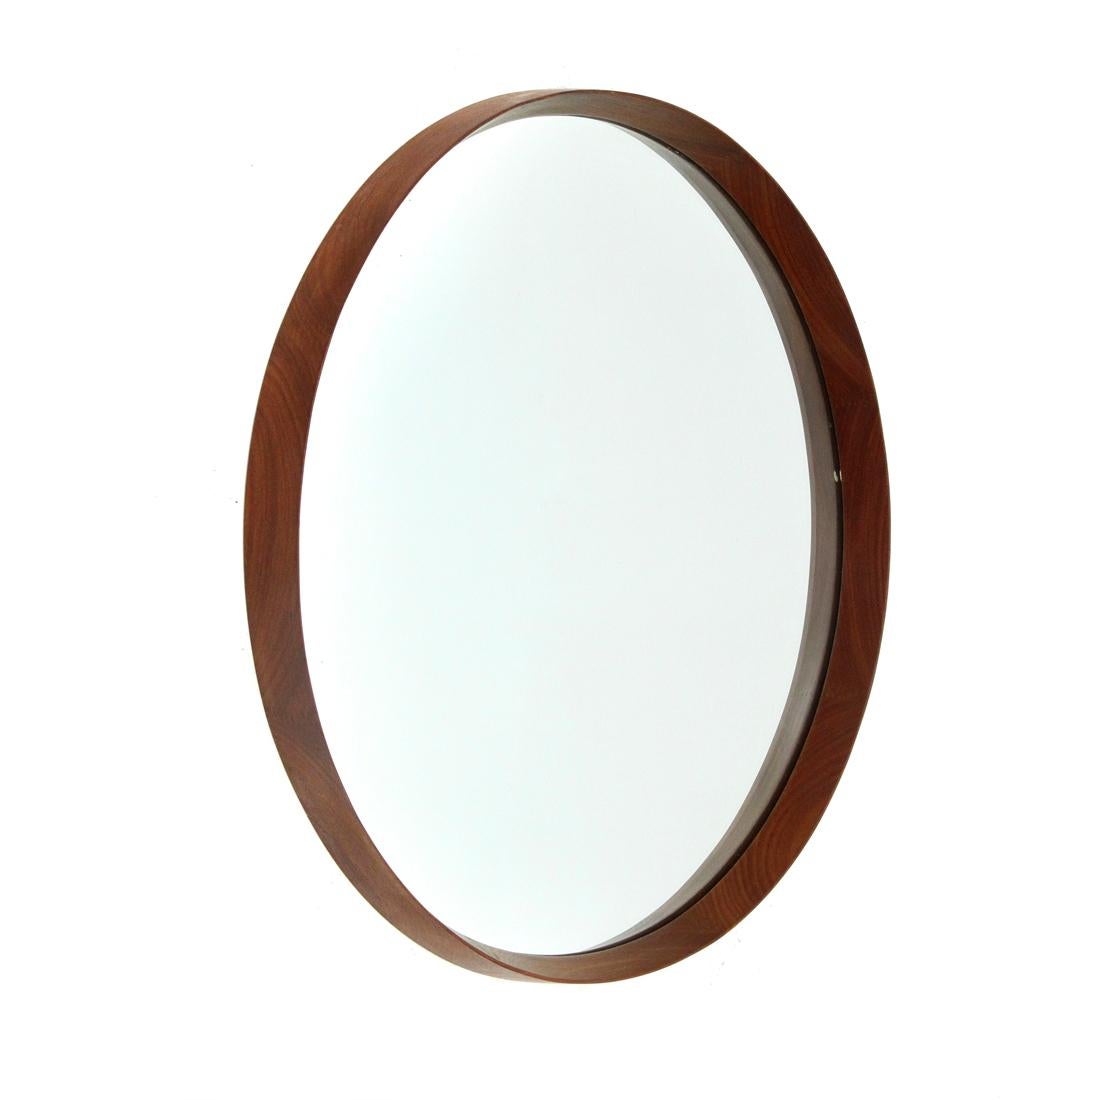 Italian manufacture mirror produced in the 1960s.
Curved wooden frame with tapered edges.
Mirrored surface in mirrored glass.
Good general conditions, some signs due to normal use over time.

Dimensions: Diameter 53 cm, depth 4.5 cm.